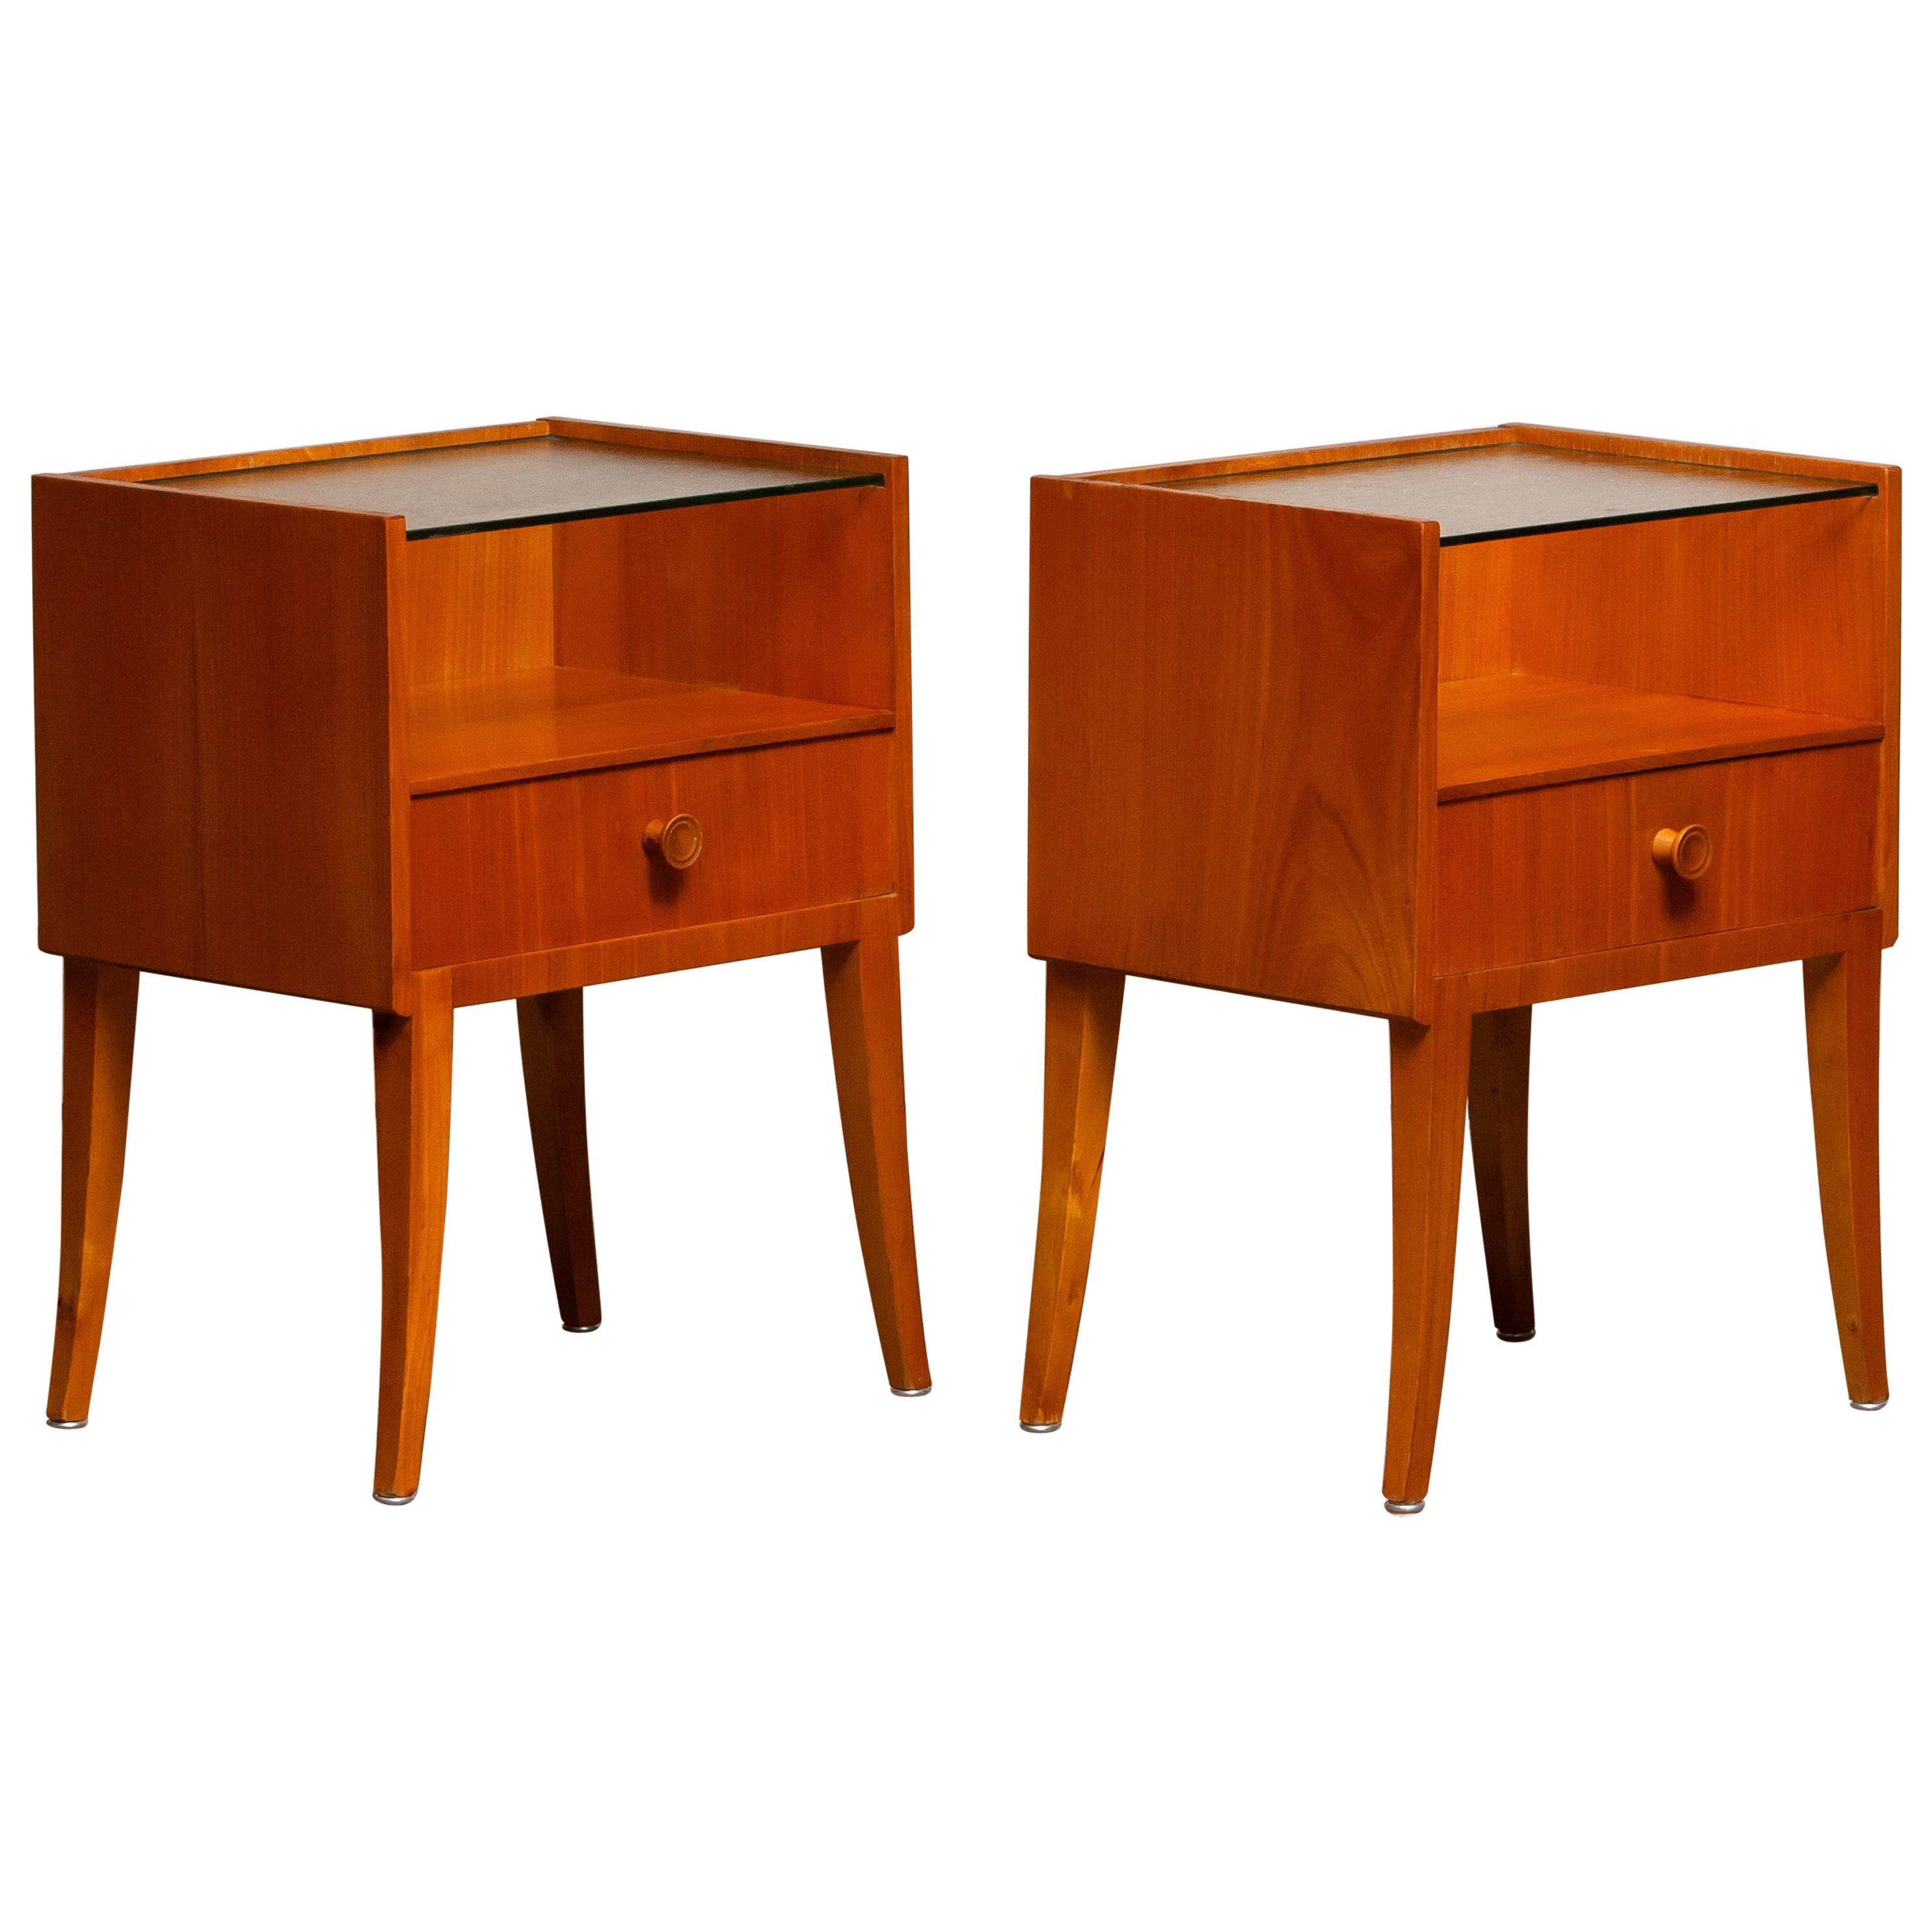 Very elegant set of two Scandinavian nightstands or bedside tables made in elm with a glass toping from Sweden.
The nightstands or bedside tables are overall in good condition.